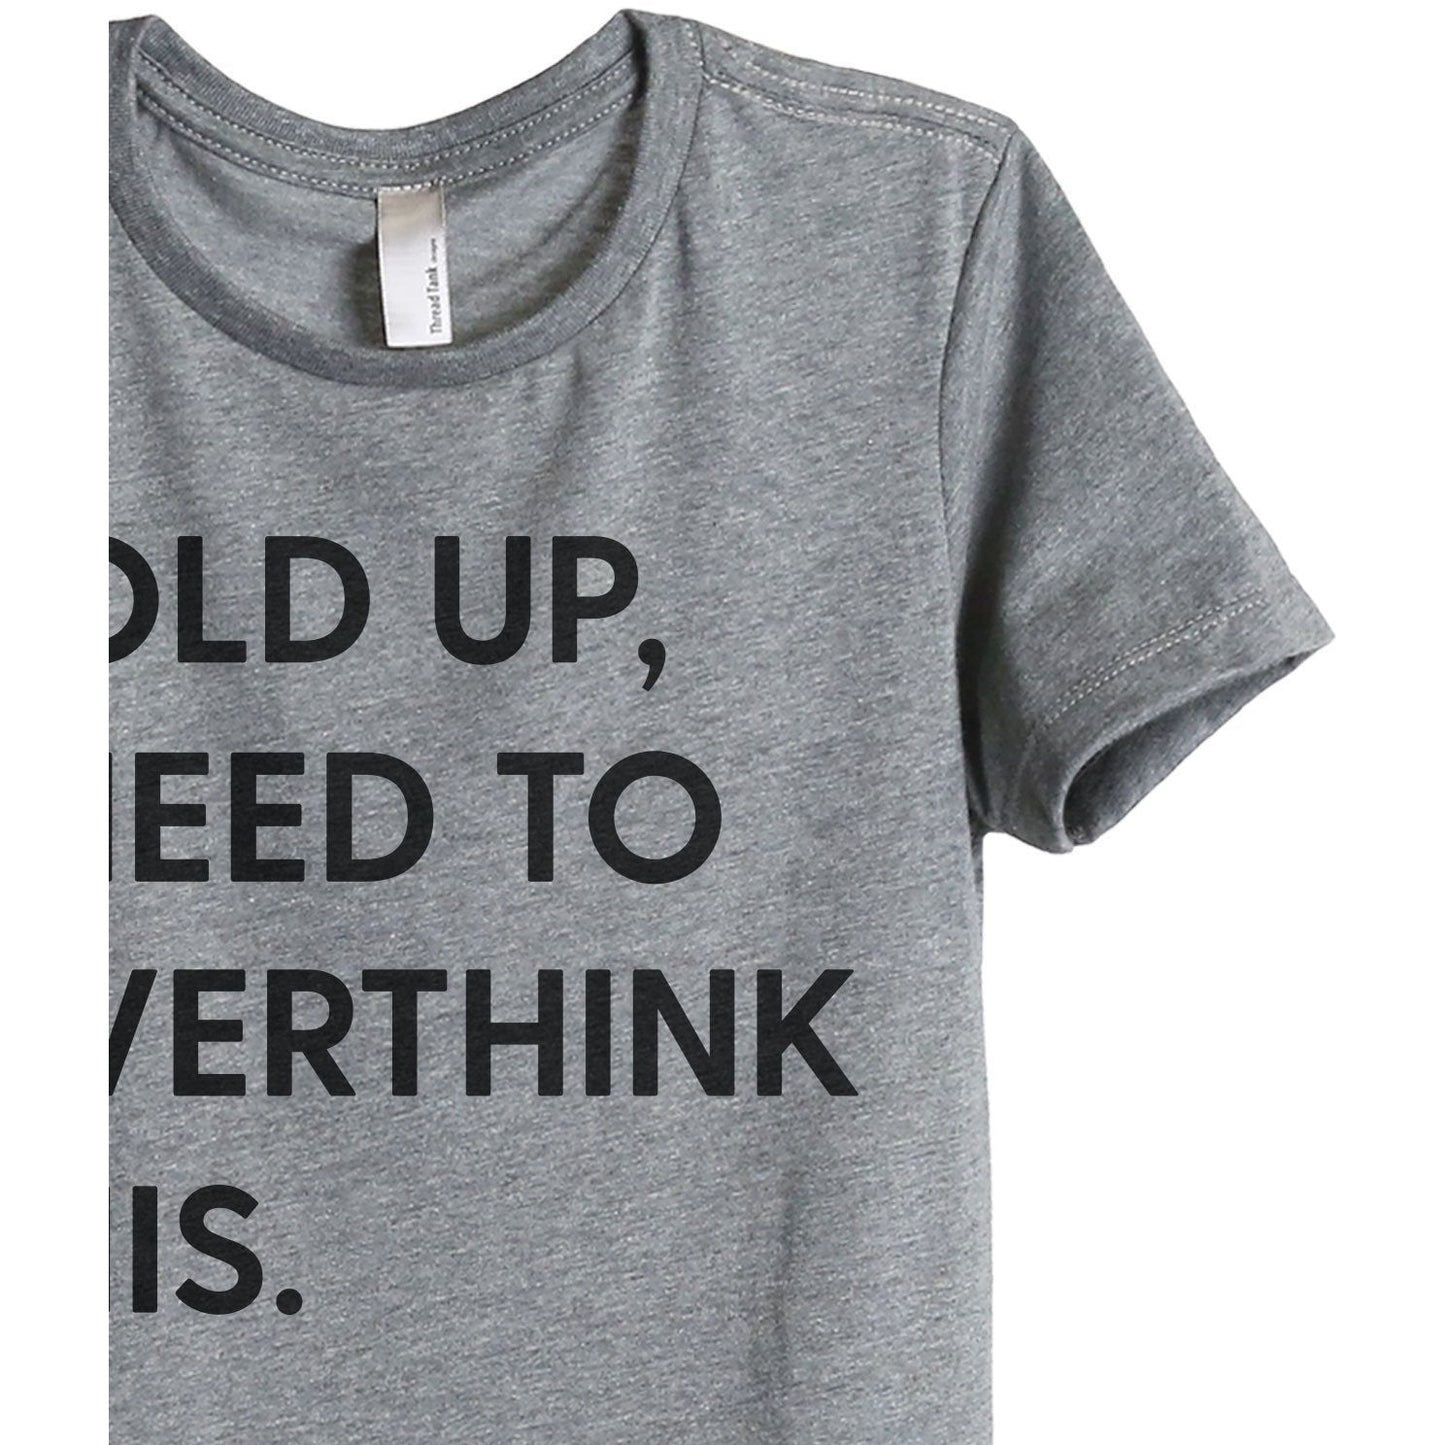 Hold Up, I Need To Rethink This Women's Relaxed Crewneck T-Shirt Top Tee Heather Grey Zoom Details
